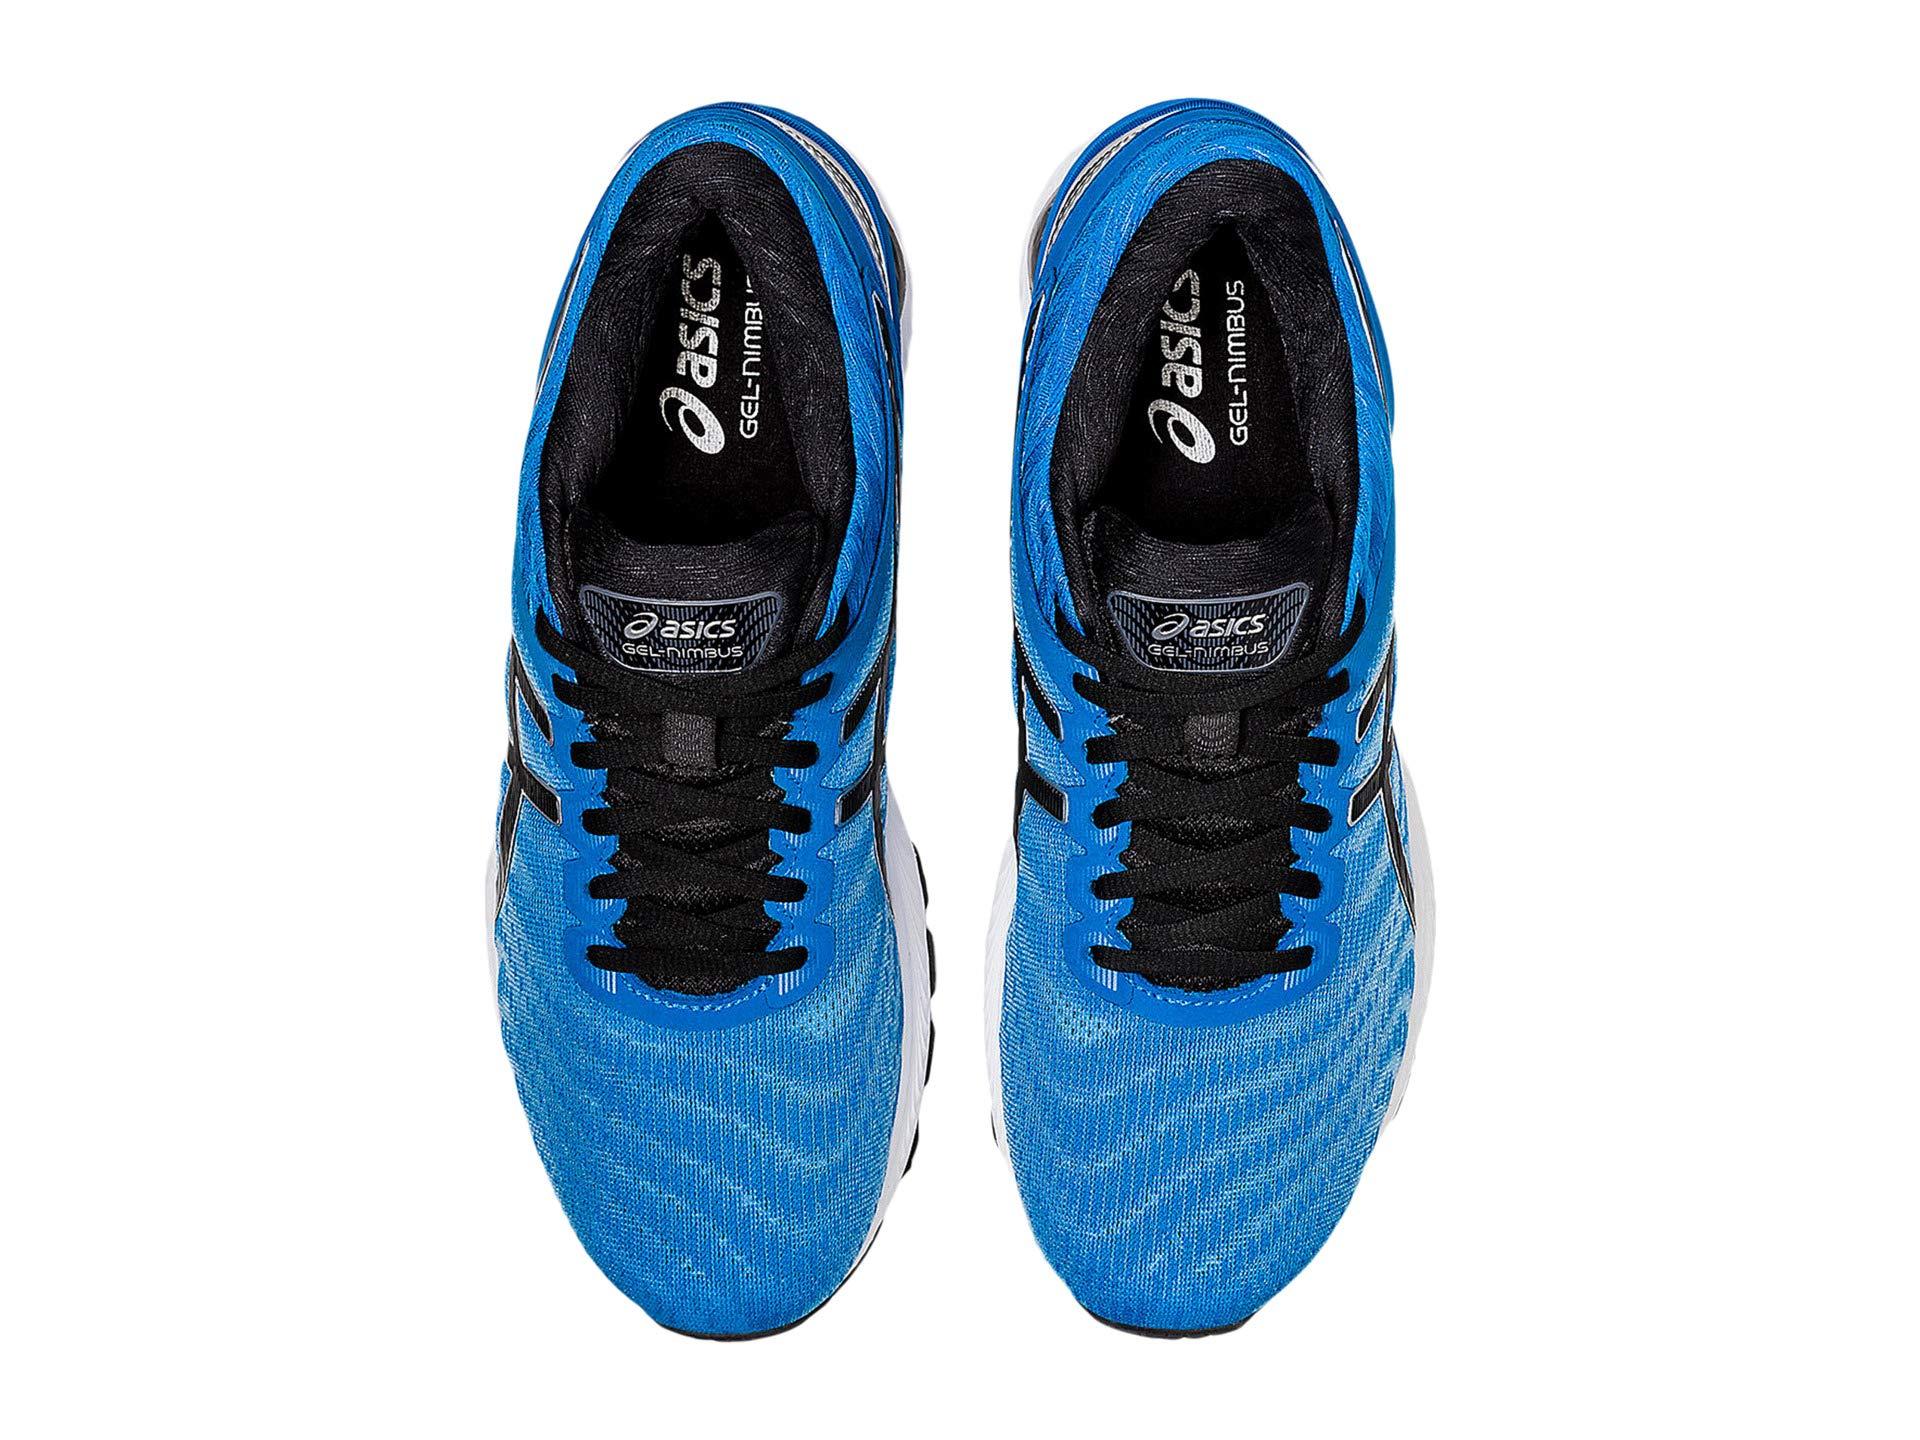 Asics Synthetic Gel-nimbus in Blue/Grey (Blue) for Men - Save 25% - Lyst